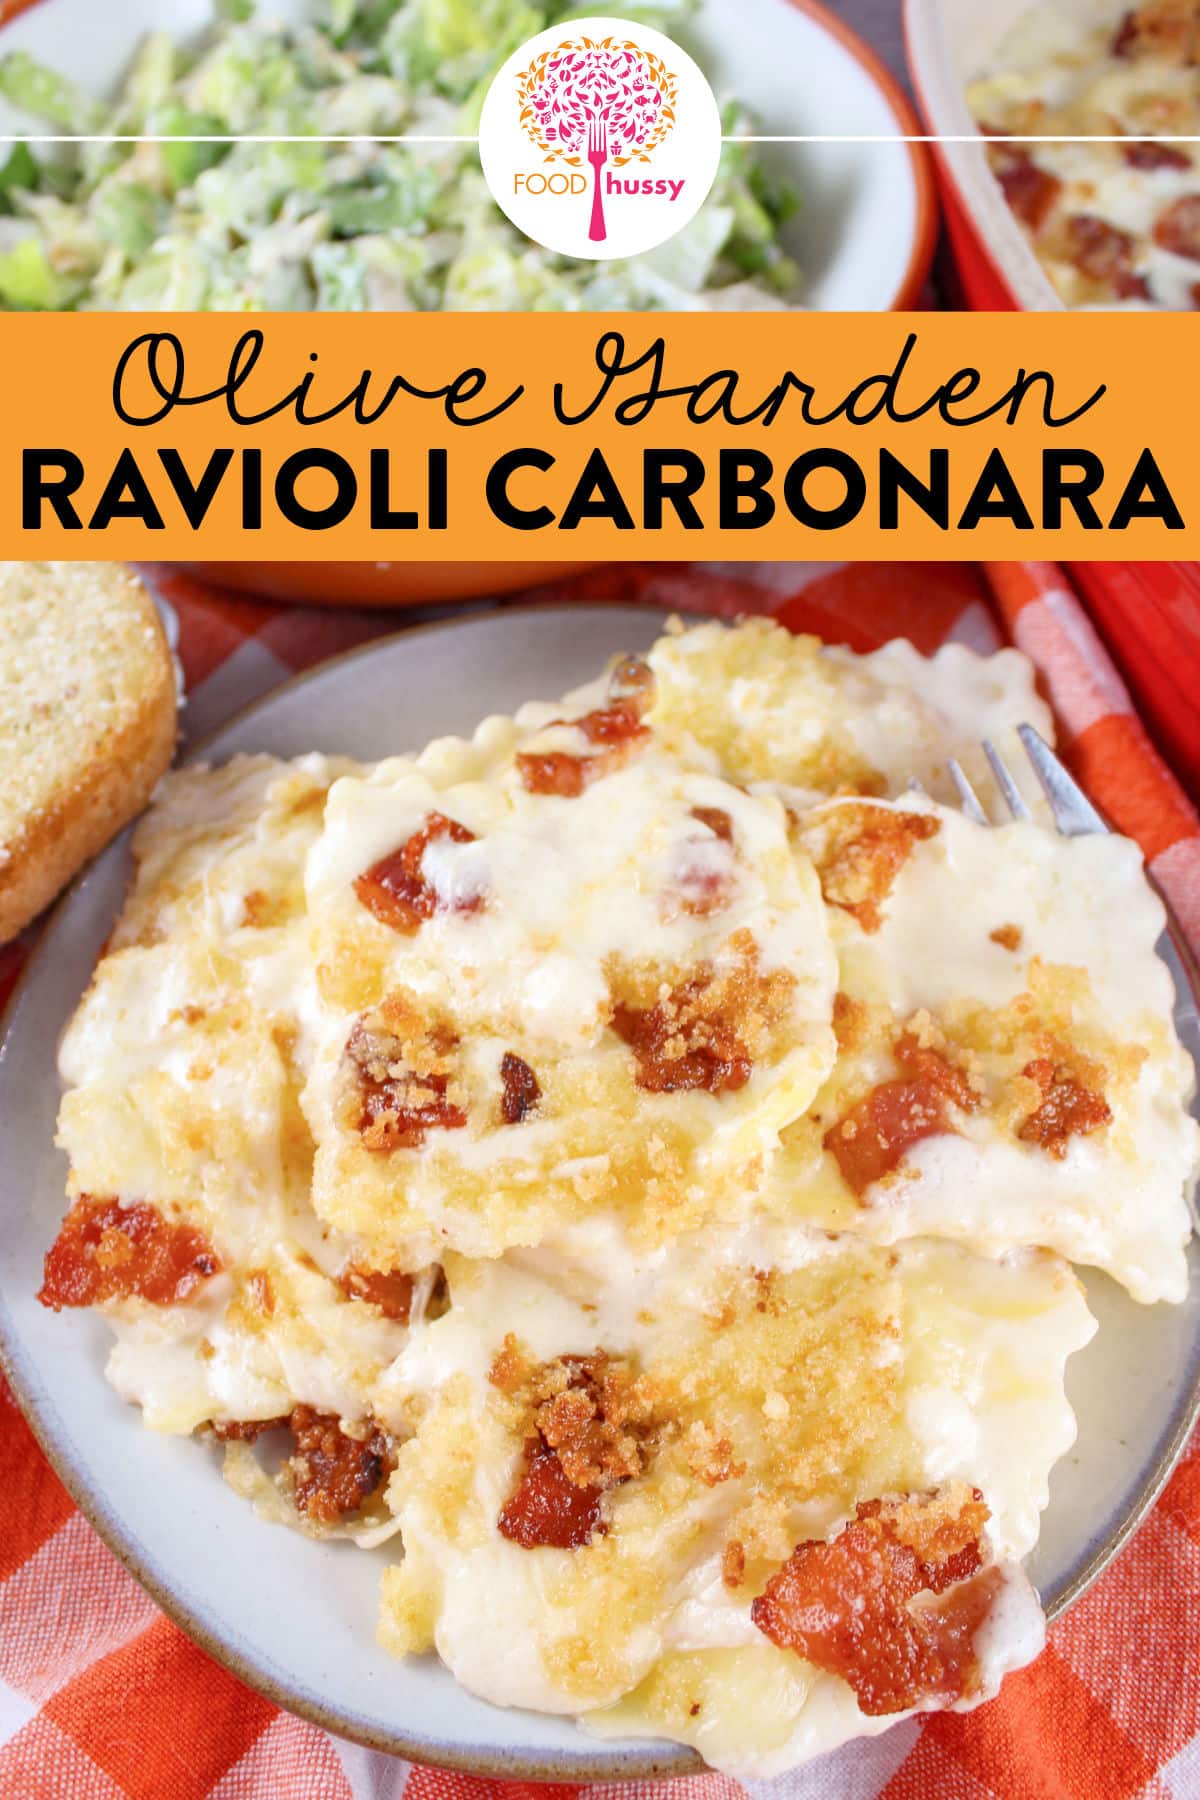 Olive Garden Ravioli Carbonara is a creamy and delicious dish! Loads of cheese ravioli coated in this delicious alfredo carbonara sauce topped with smoky bacon pieces, more cheese and a crunchy topping! via @foodhussy